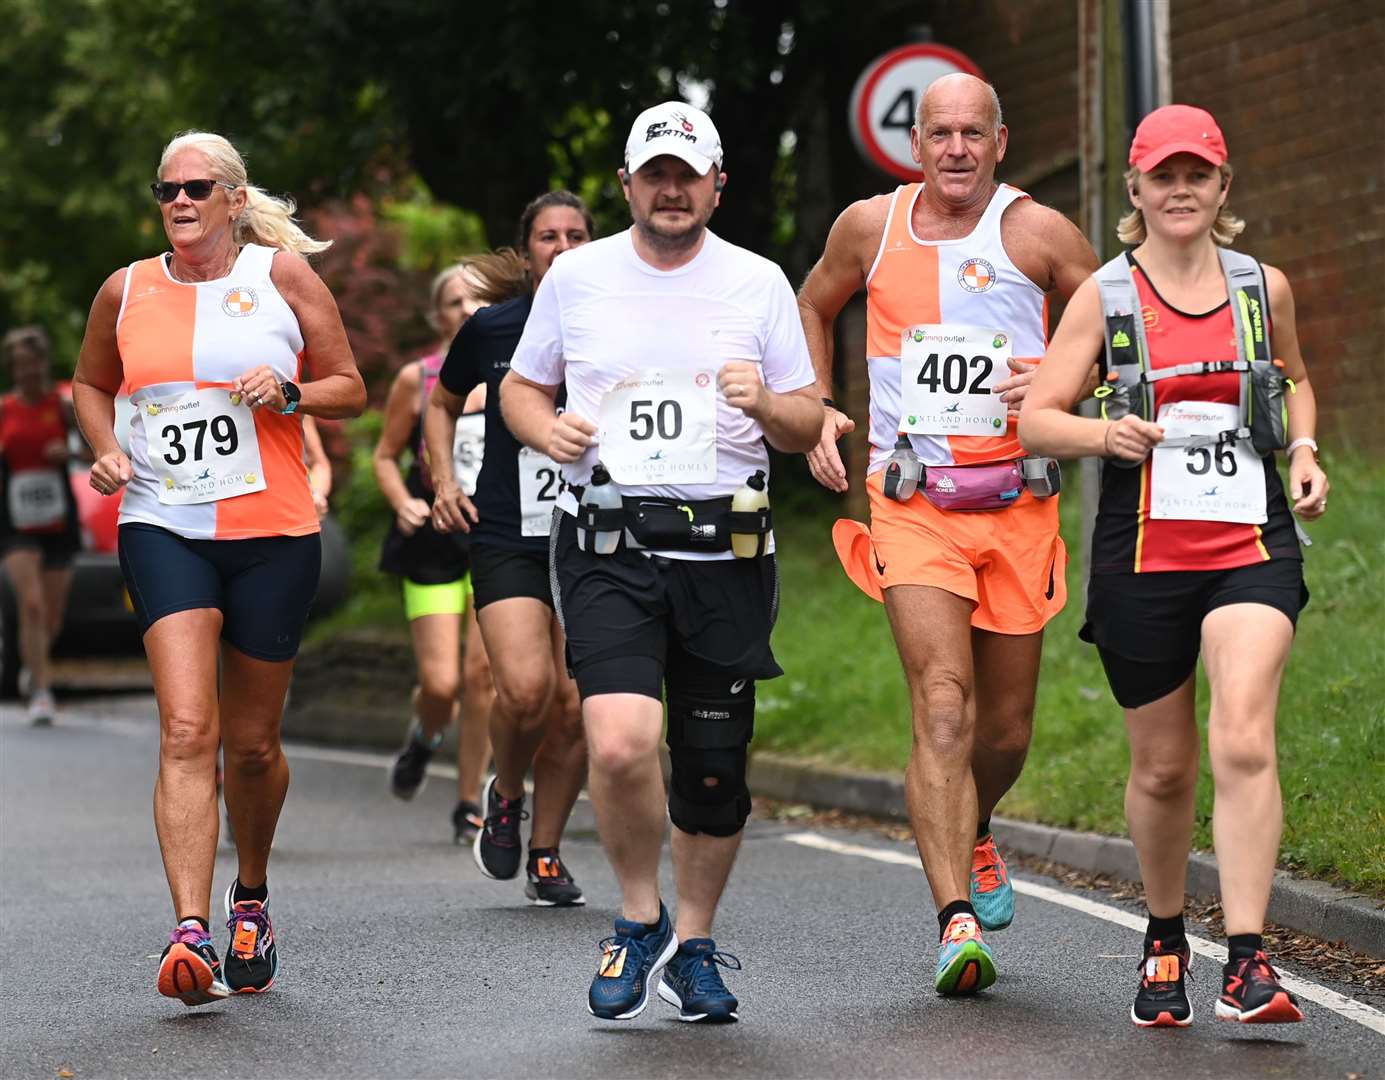 Melanie Satchwell (379) of South Kent Harriers, Mark Bullen (50), South Kent Harriers' Royd Southall (402), and Kerry Buston (56). Picture: Barry Goodwin (49789840)